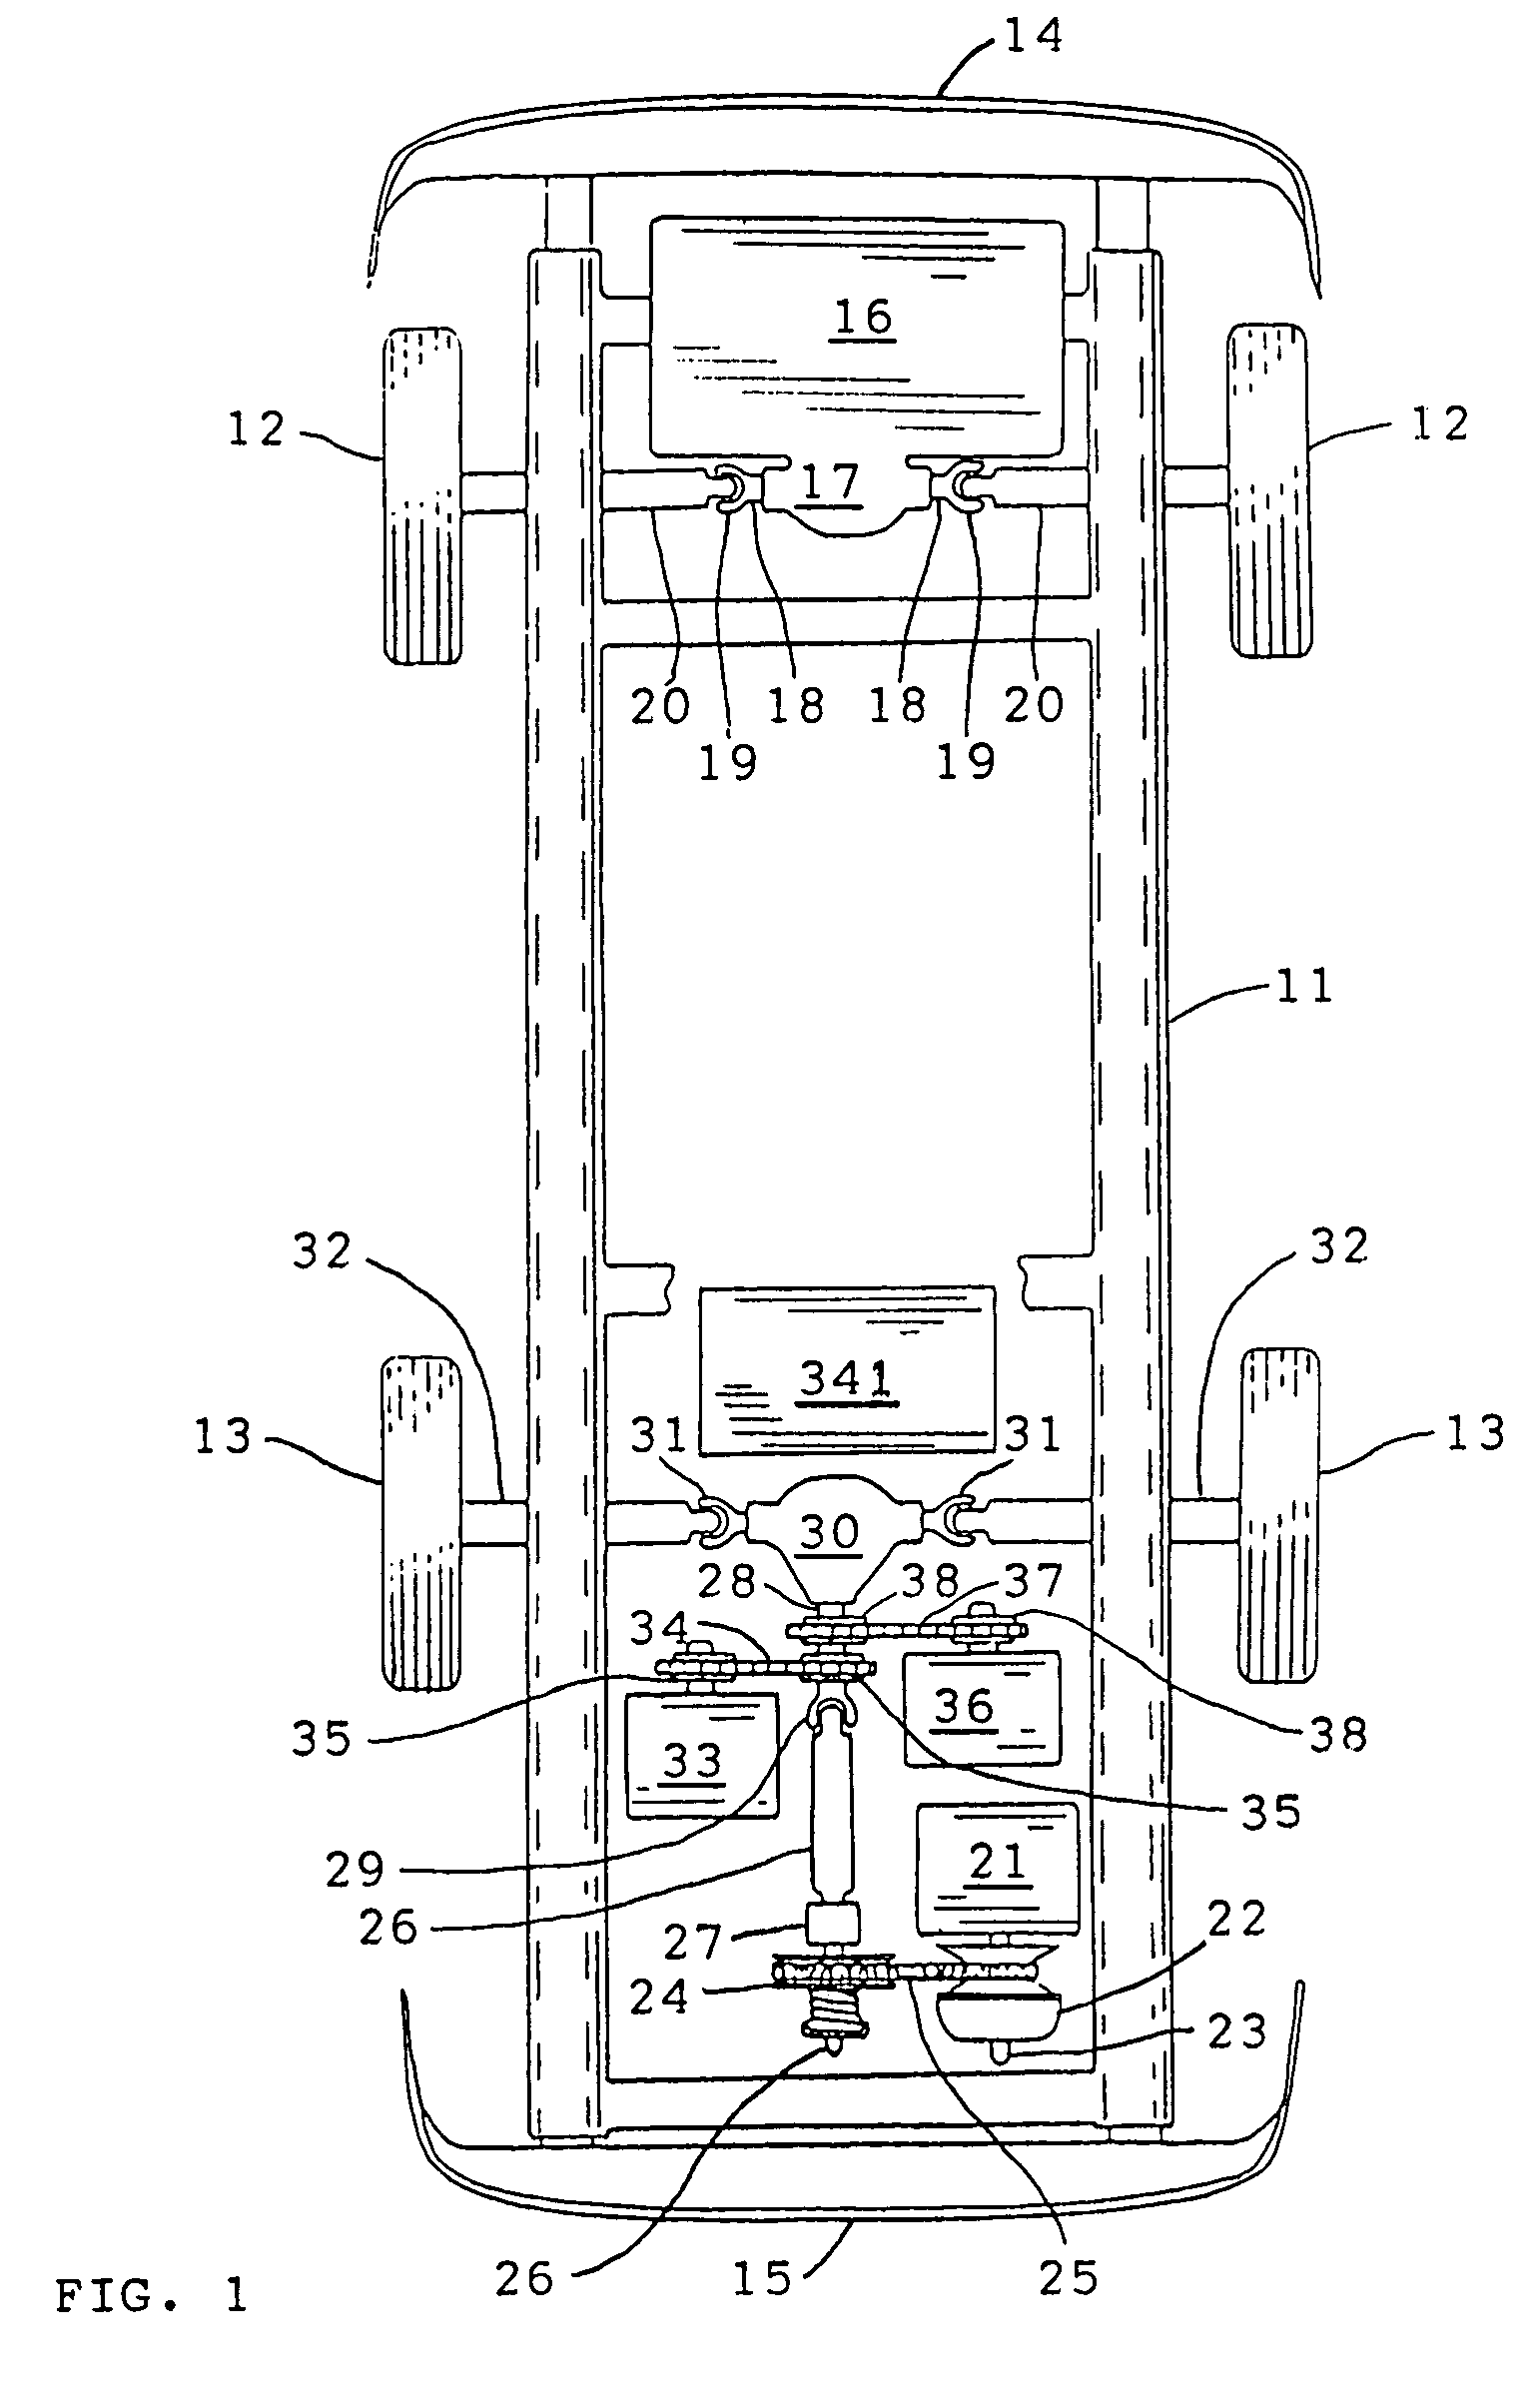 Motor vehicle with a primary engine for acceleration and secondary engine augmented by an electric motor for cruising